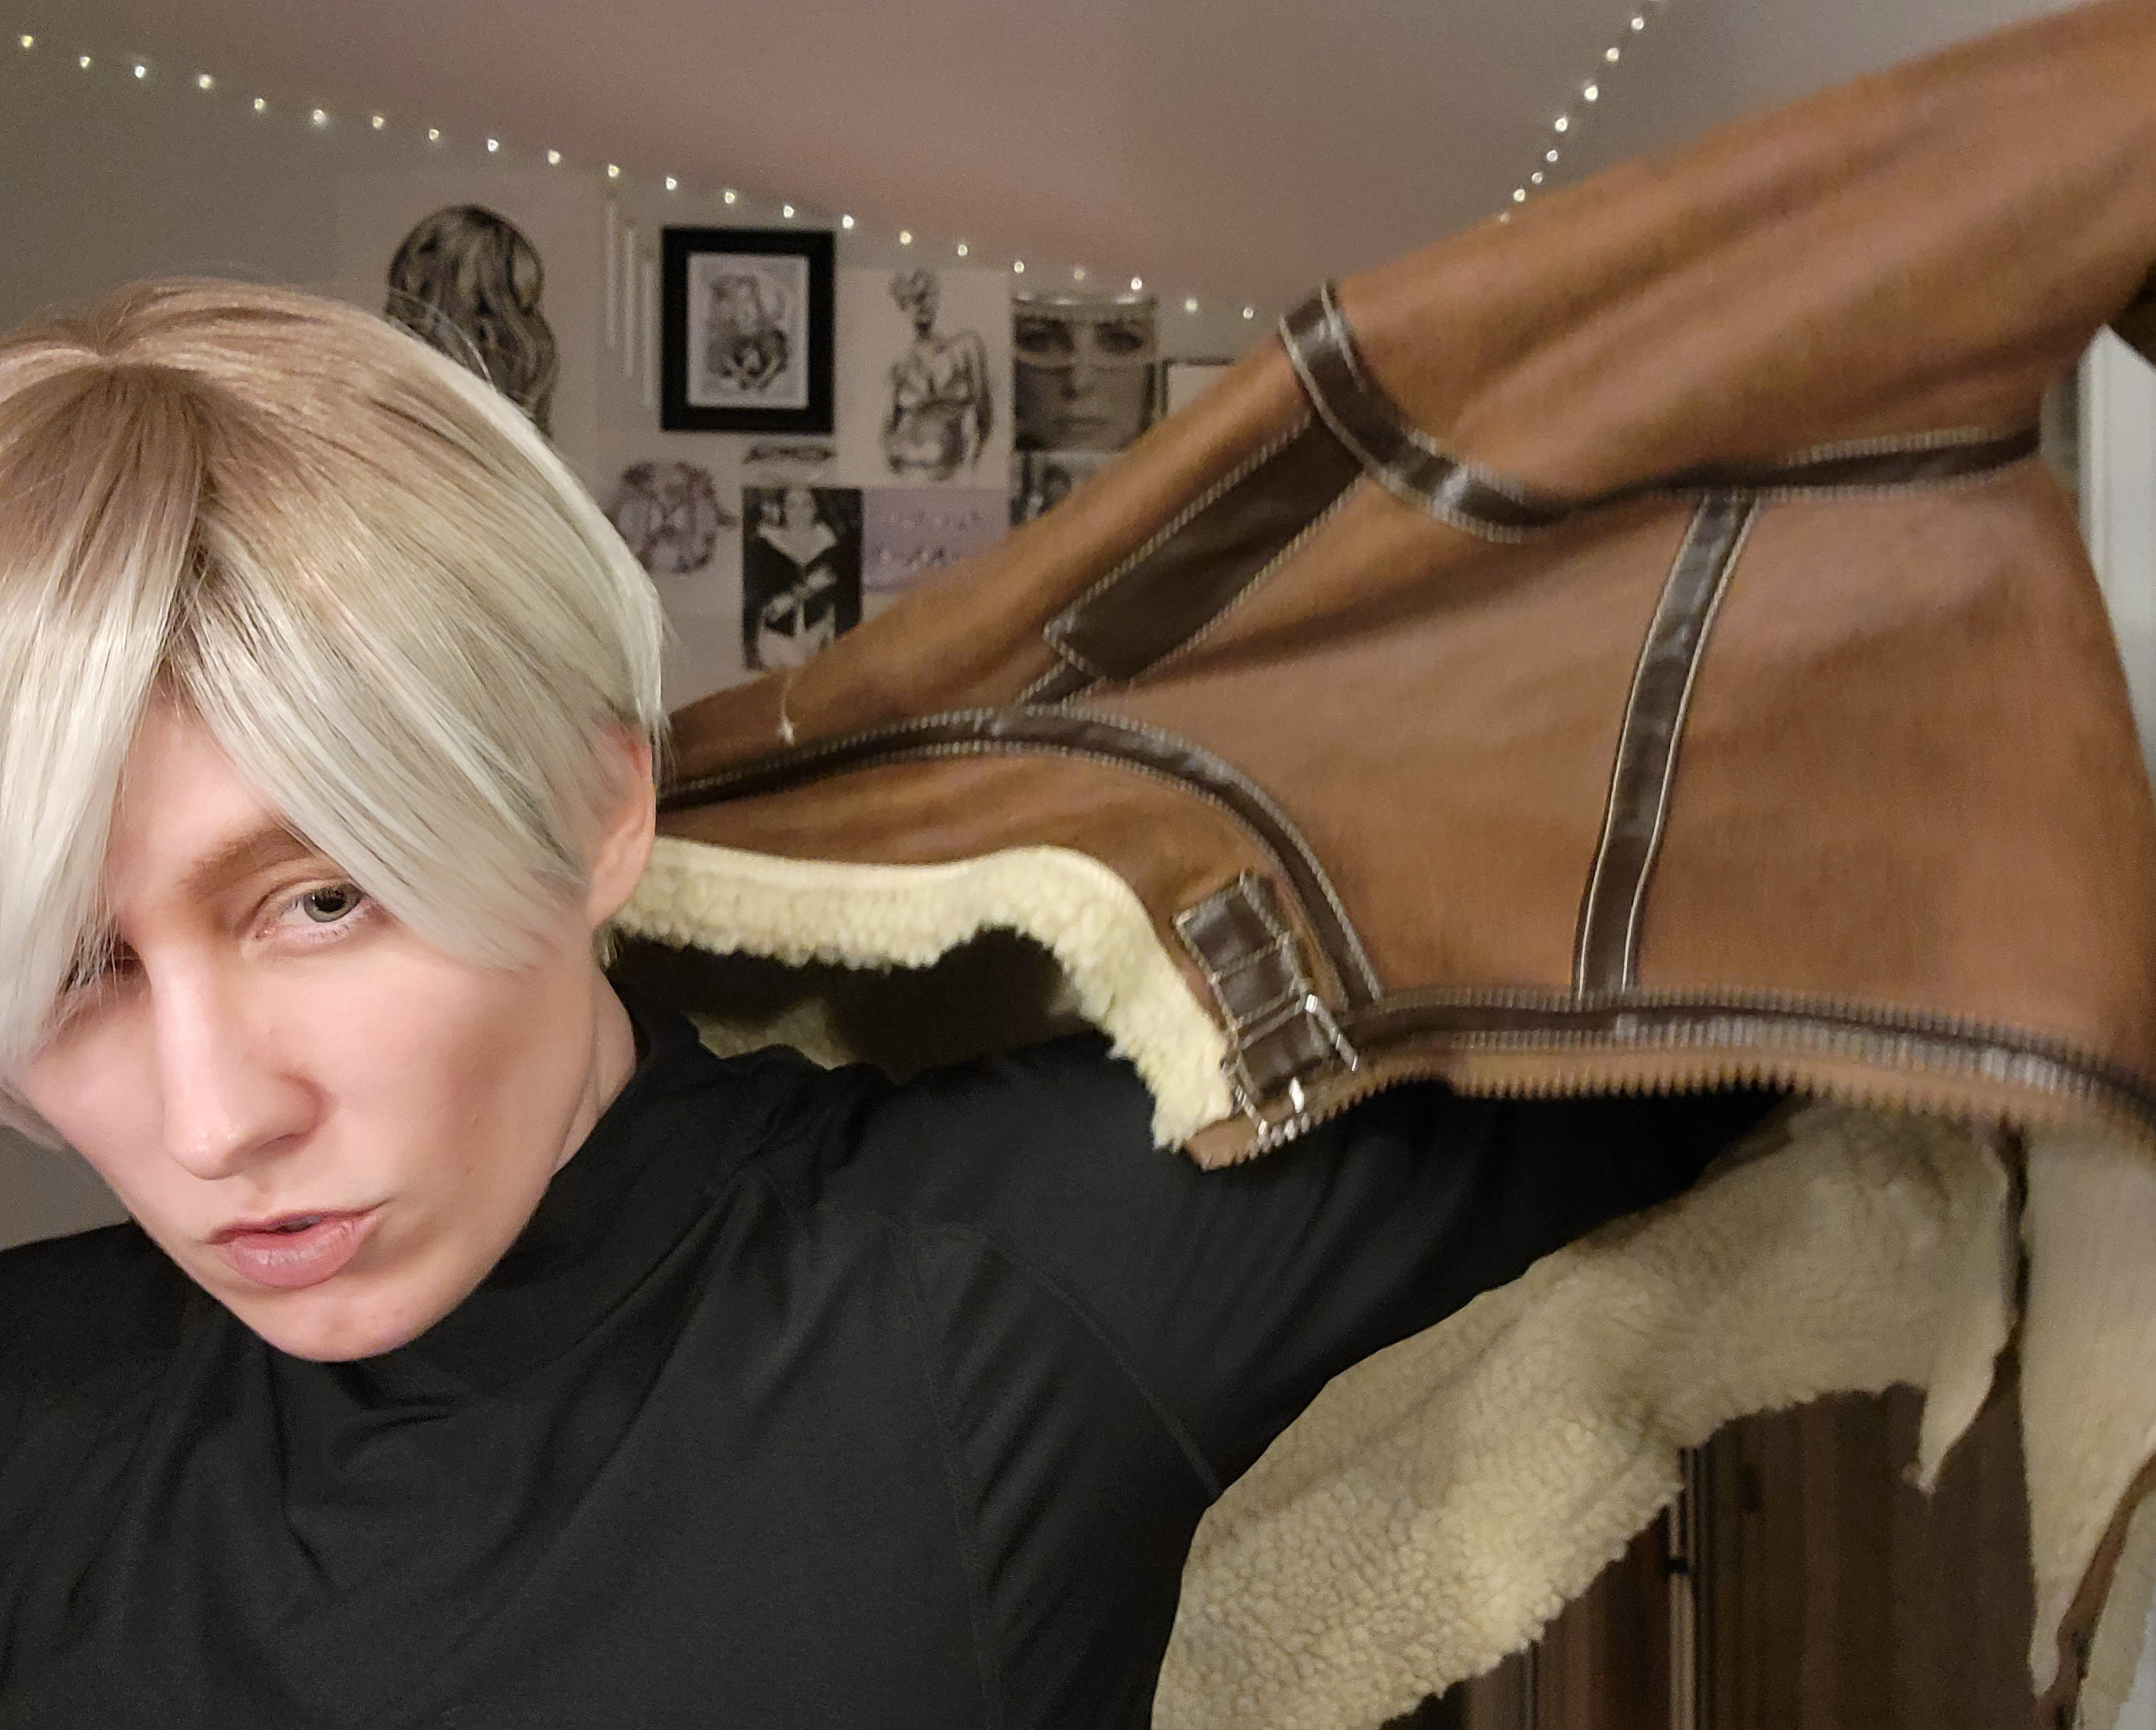 The author in a black turtleneck and blond wig, pulling a brown jacket over her shoulders to complete the Leon Kennedy look